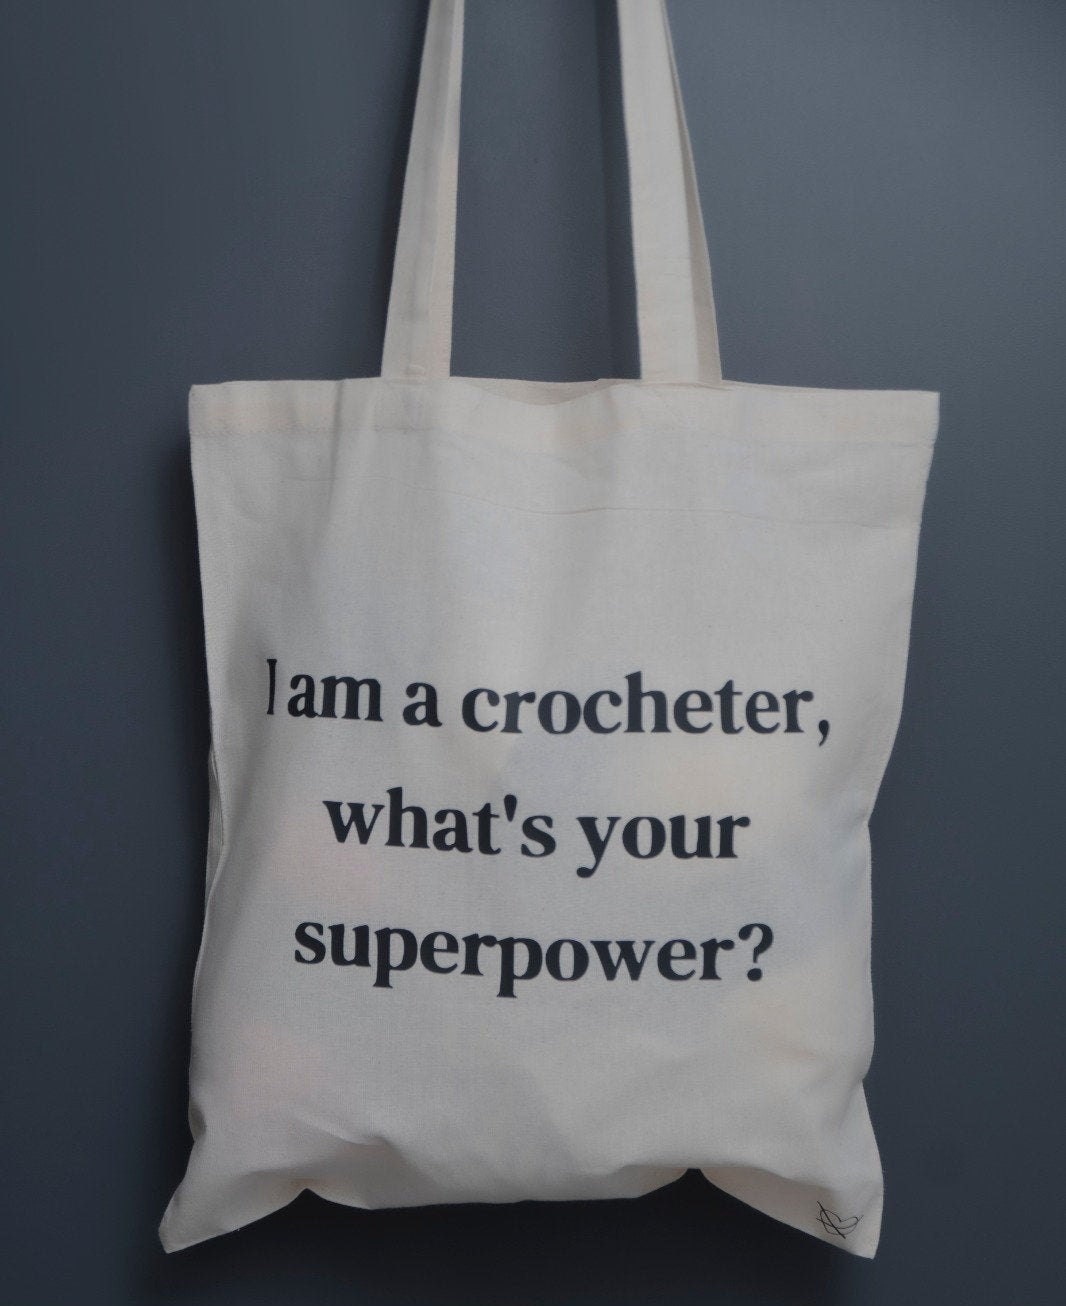 Crochet Tote Bag What's Your Superpower? Shopping Bag Bag For Life. I Crochet 